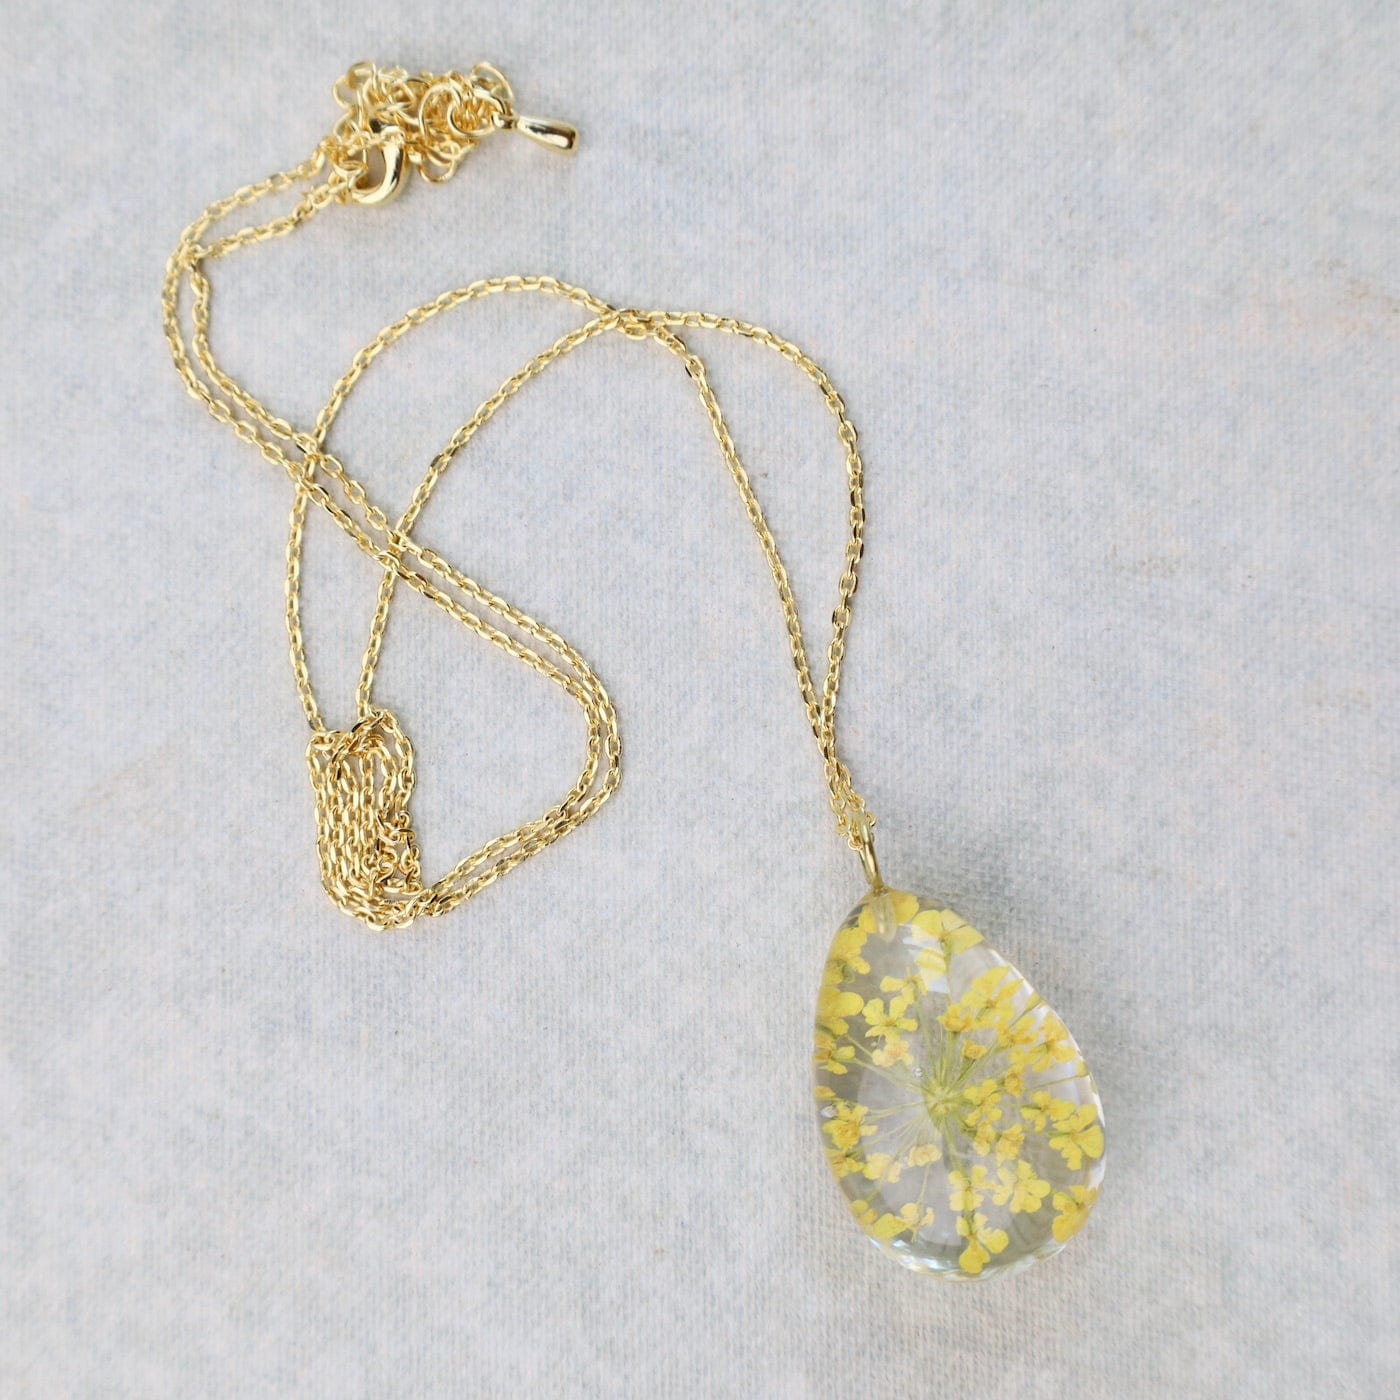 NKL-GPL Botanical Dew Drop Yellow Queen Anne Lace Necklace